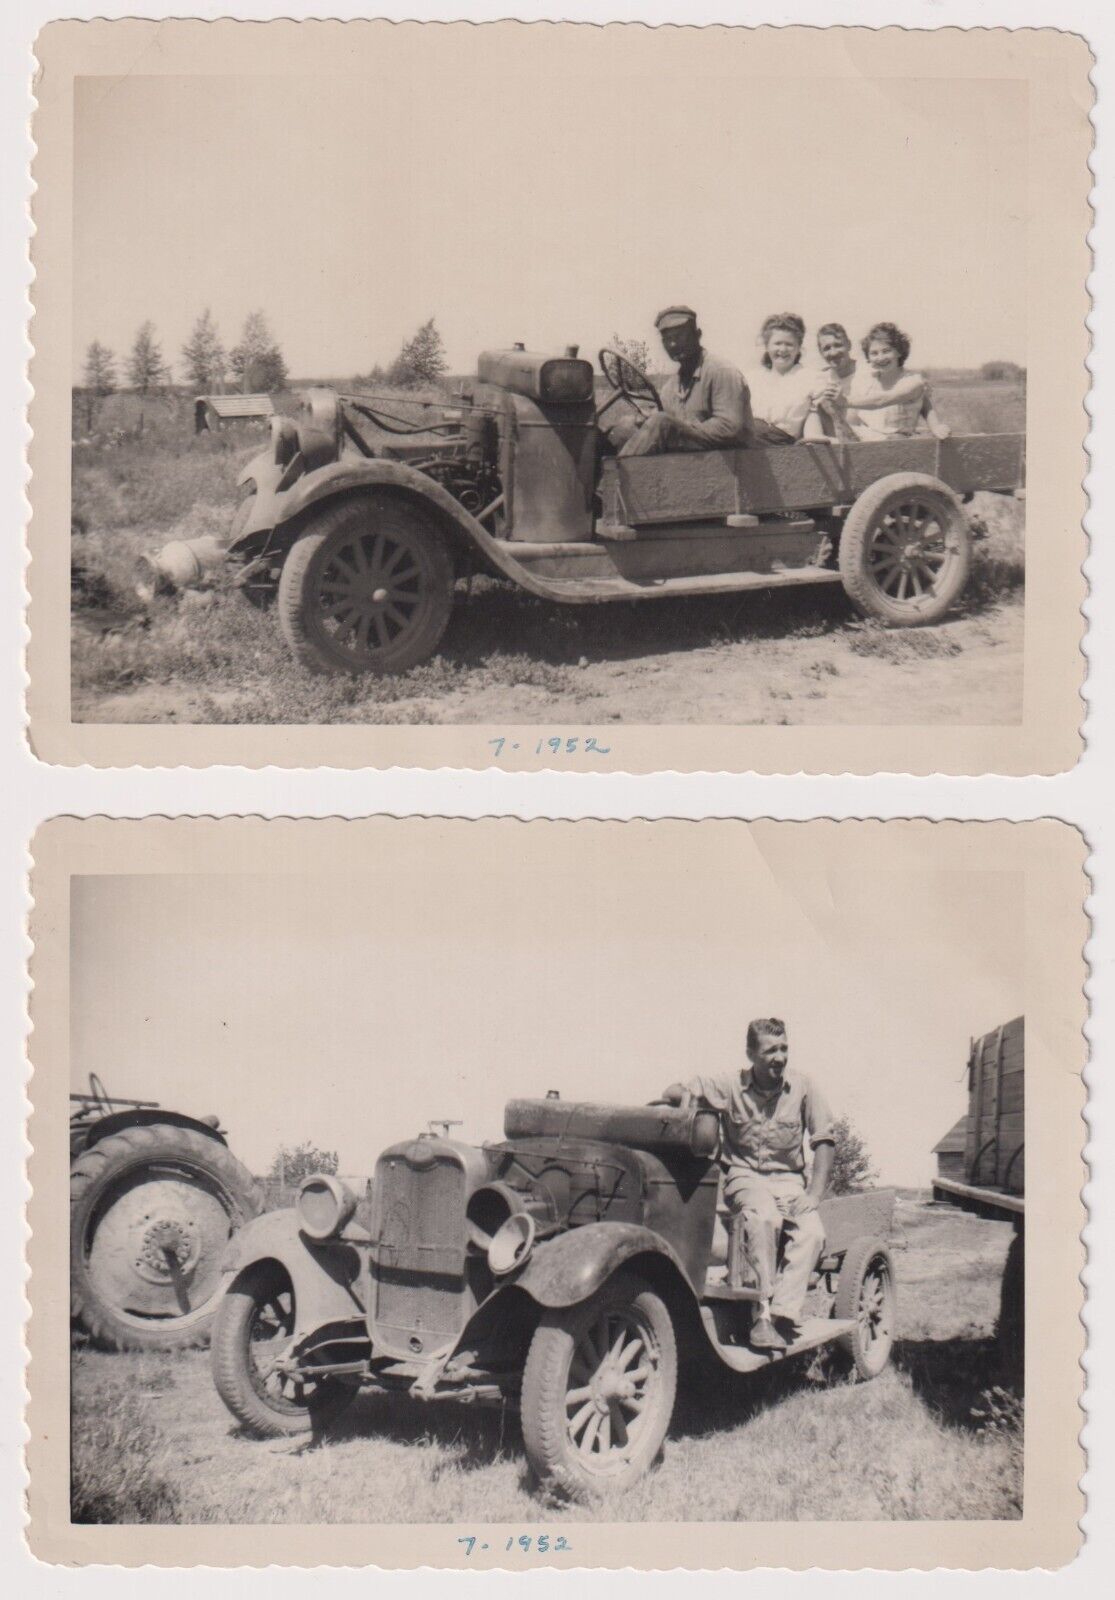 2 Photos 1952 Farm Scene Jalopy Car Converted to Flat Bed Truck, Pretty Girls